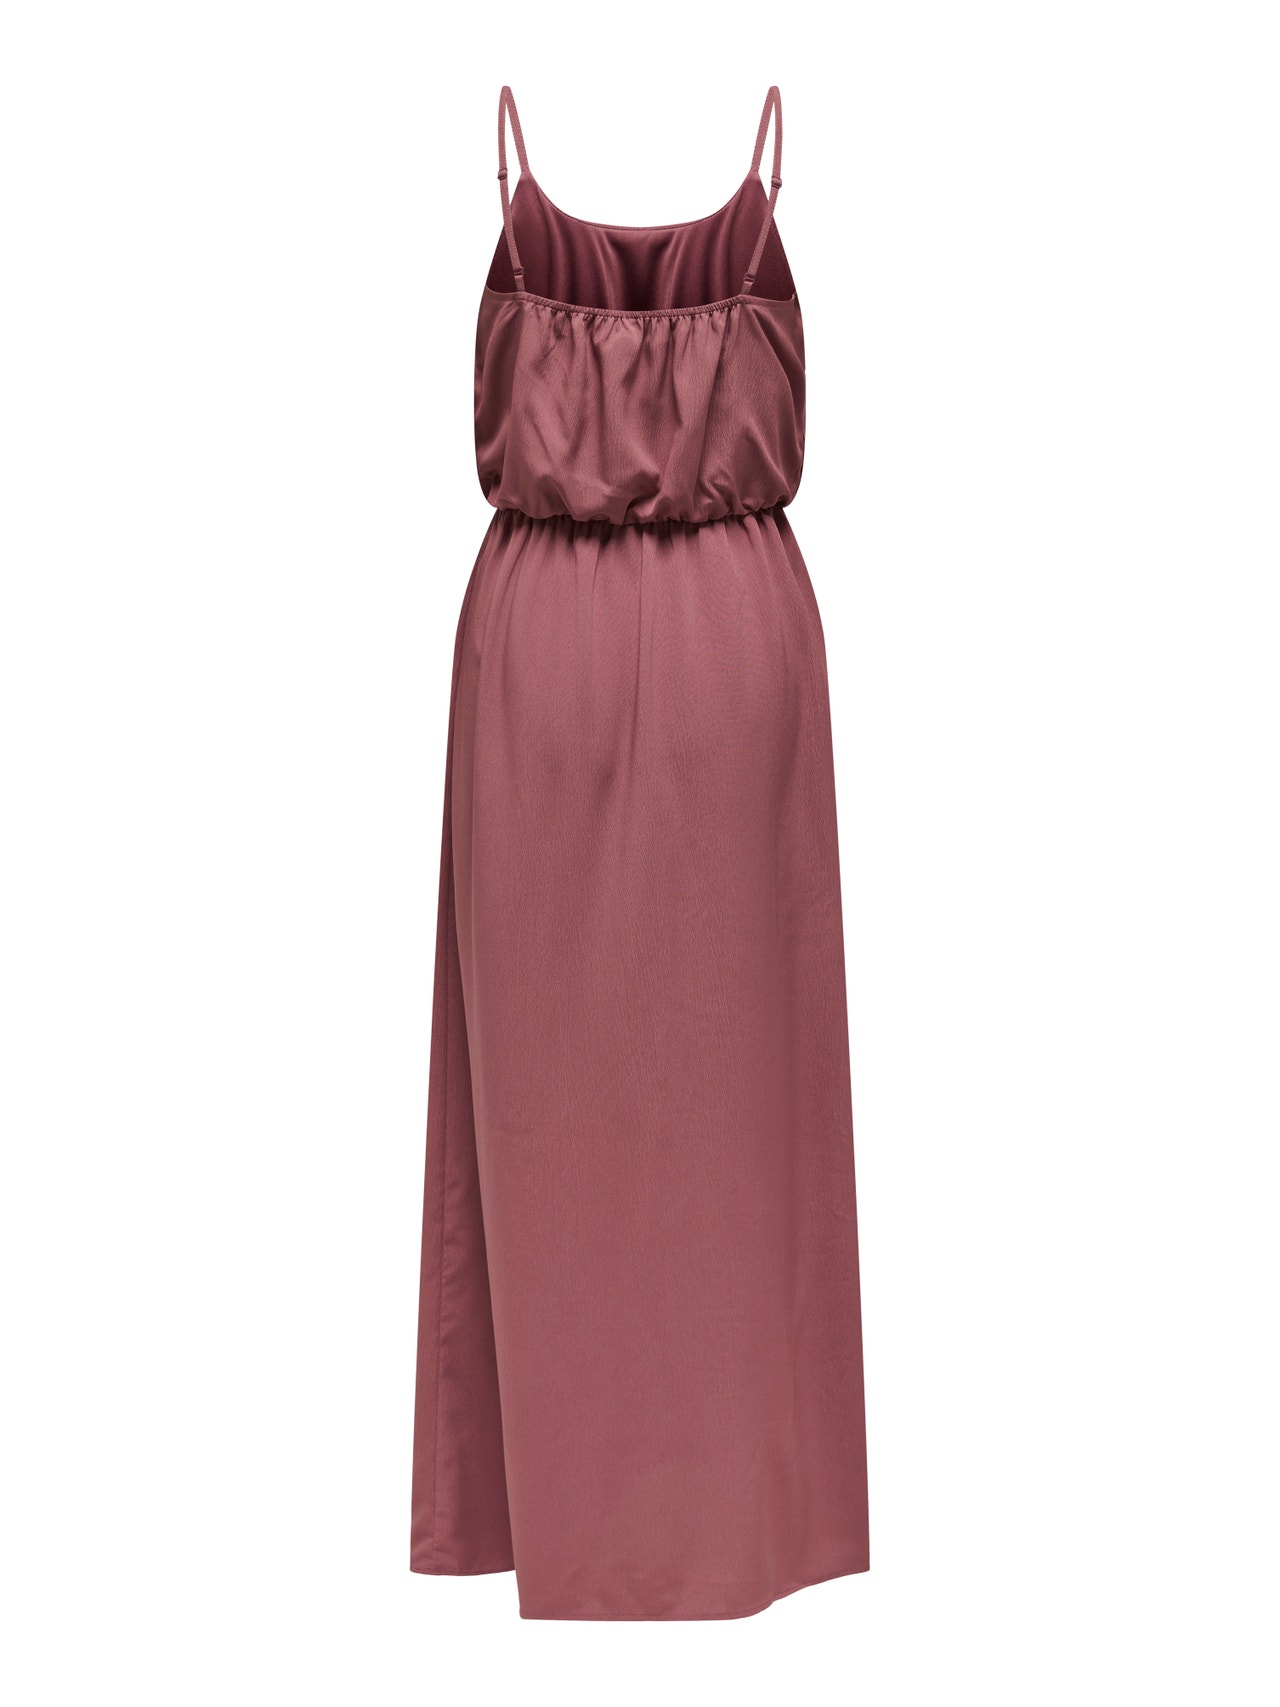 ONLY Midi dress with shoulder straps -Rose Brown - 15335556